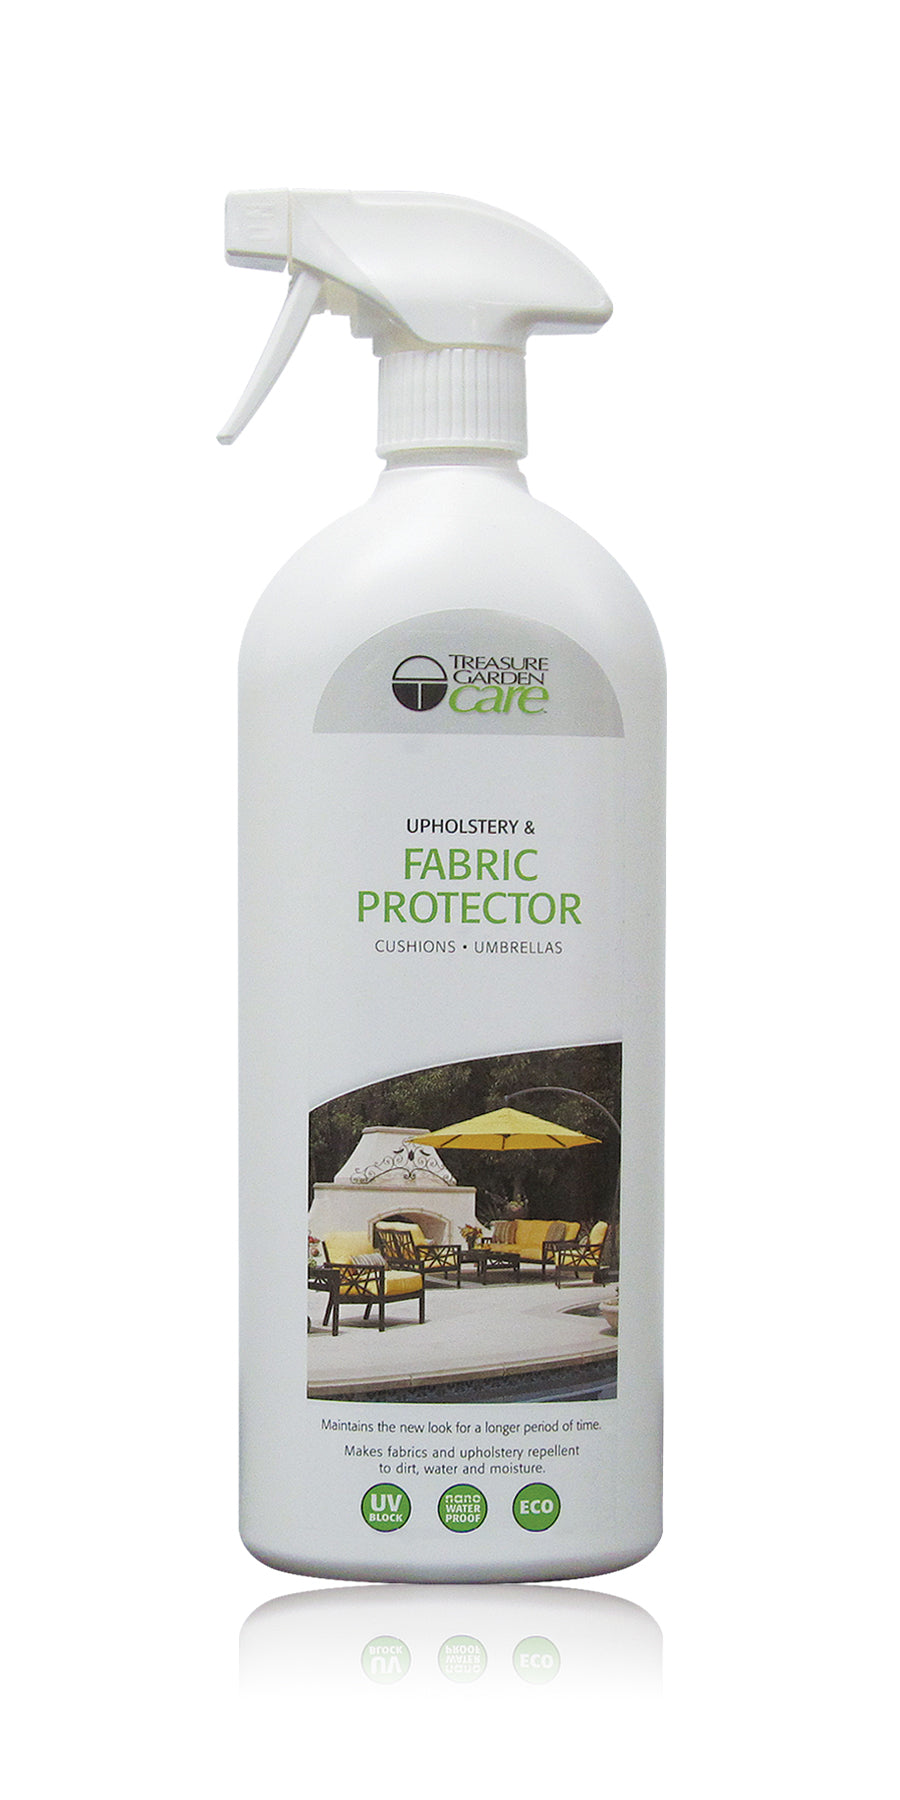 Upholstery and Fabric Protector by Treasure Garden